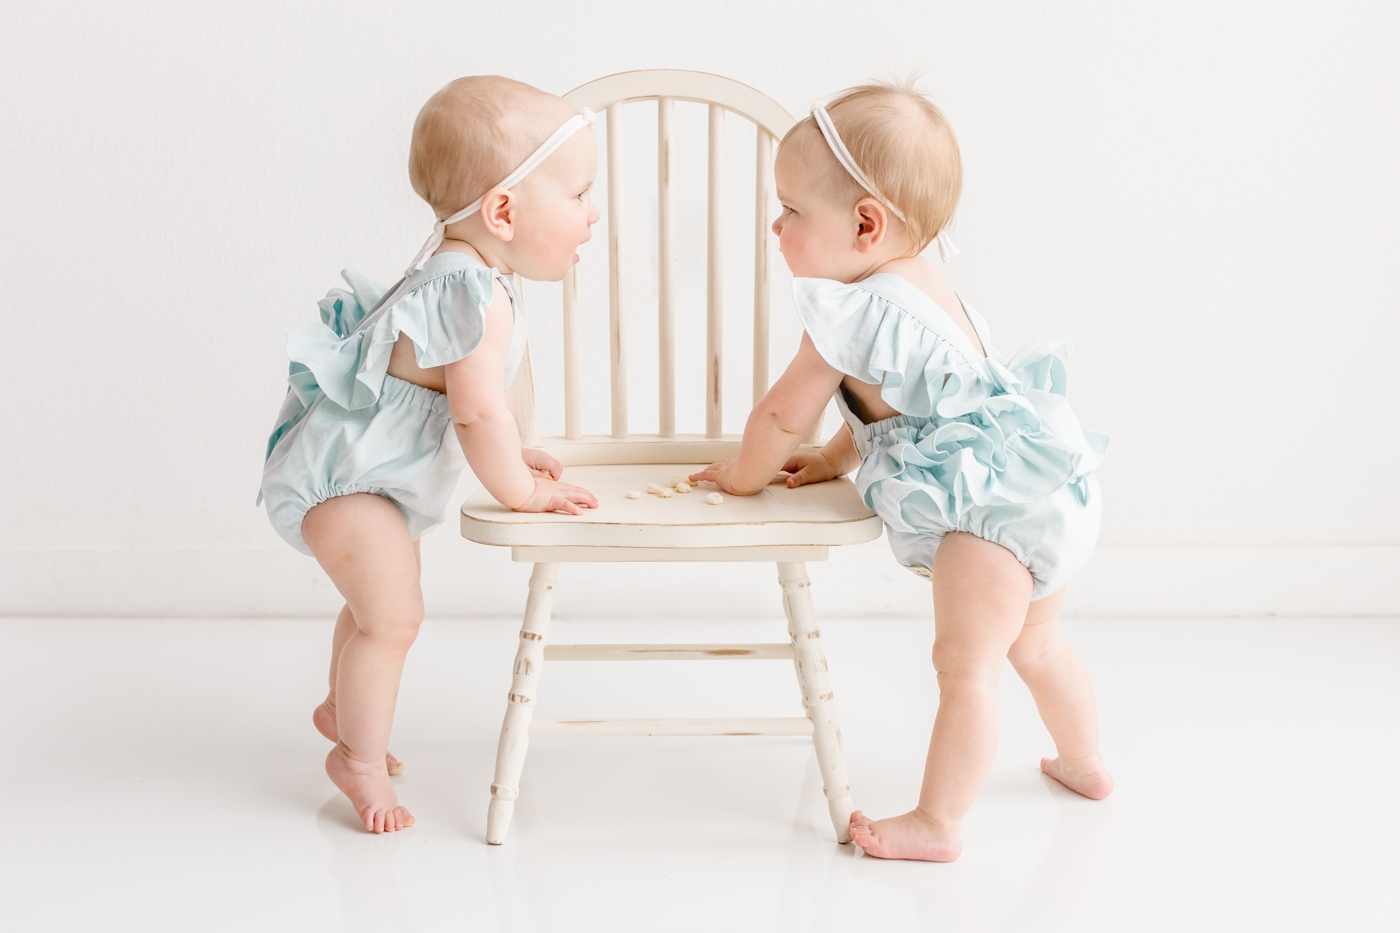 Twin girls in blue rompers standing together in studio. Photo by Sana Ahmed Photography.